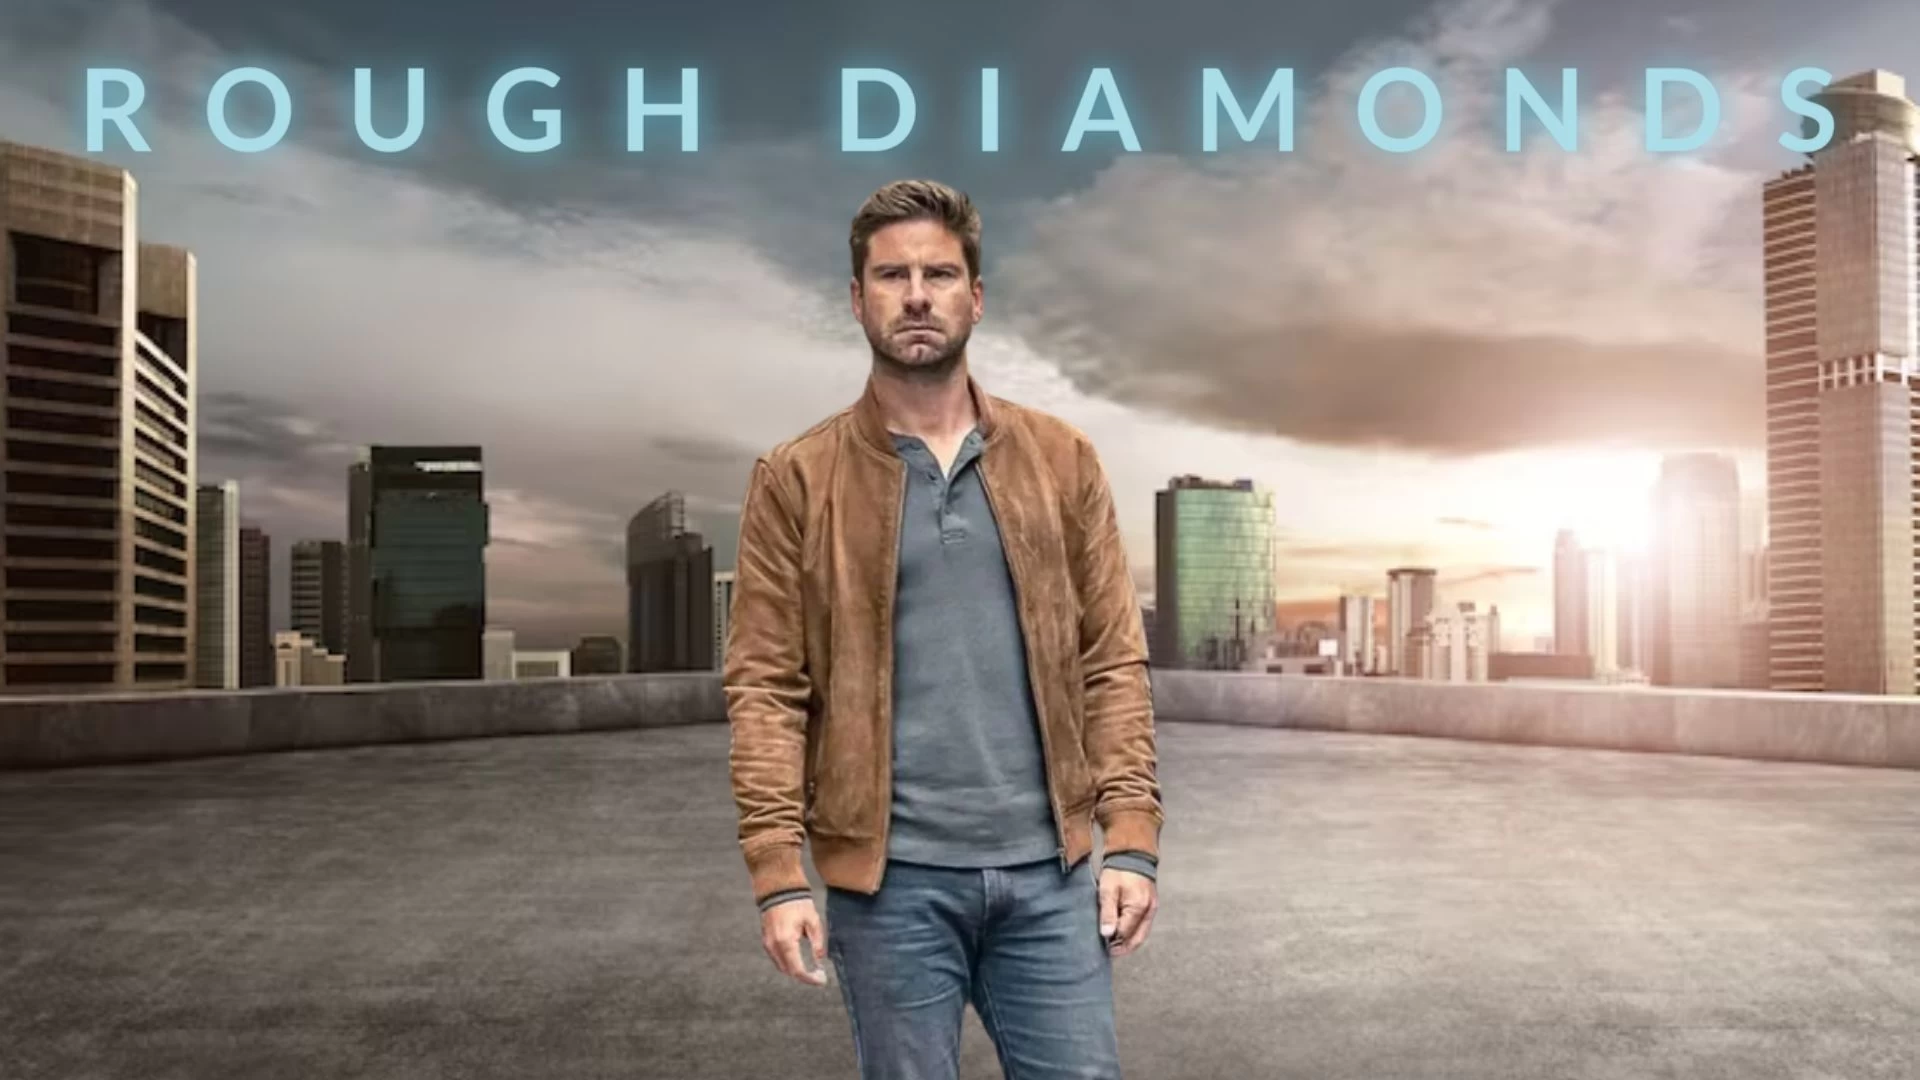 Rough Diamonds Season 1 Ending Explained, Release Date, Cast, Plot, Where to Watch and More